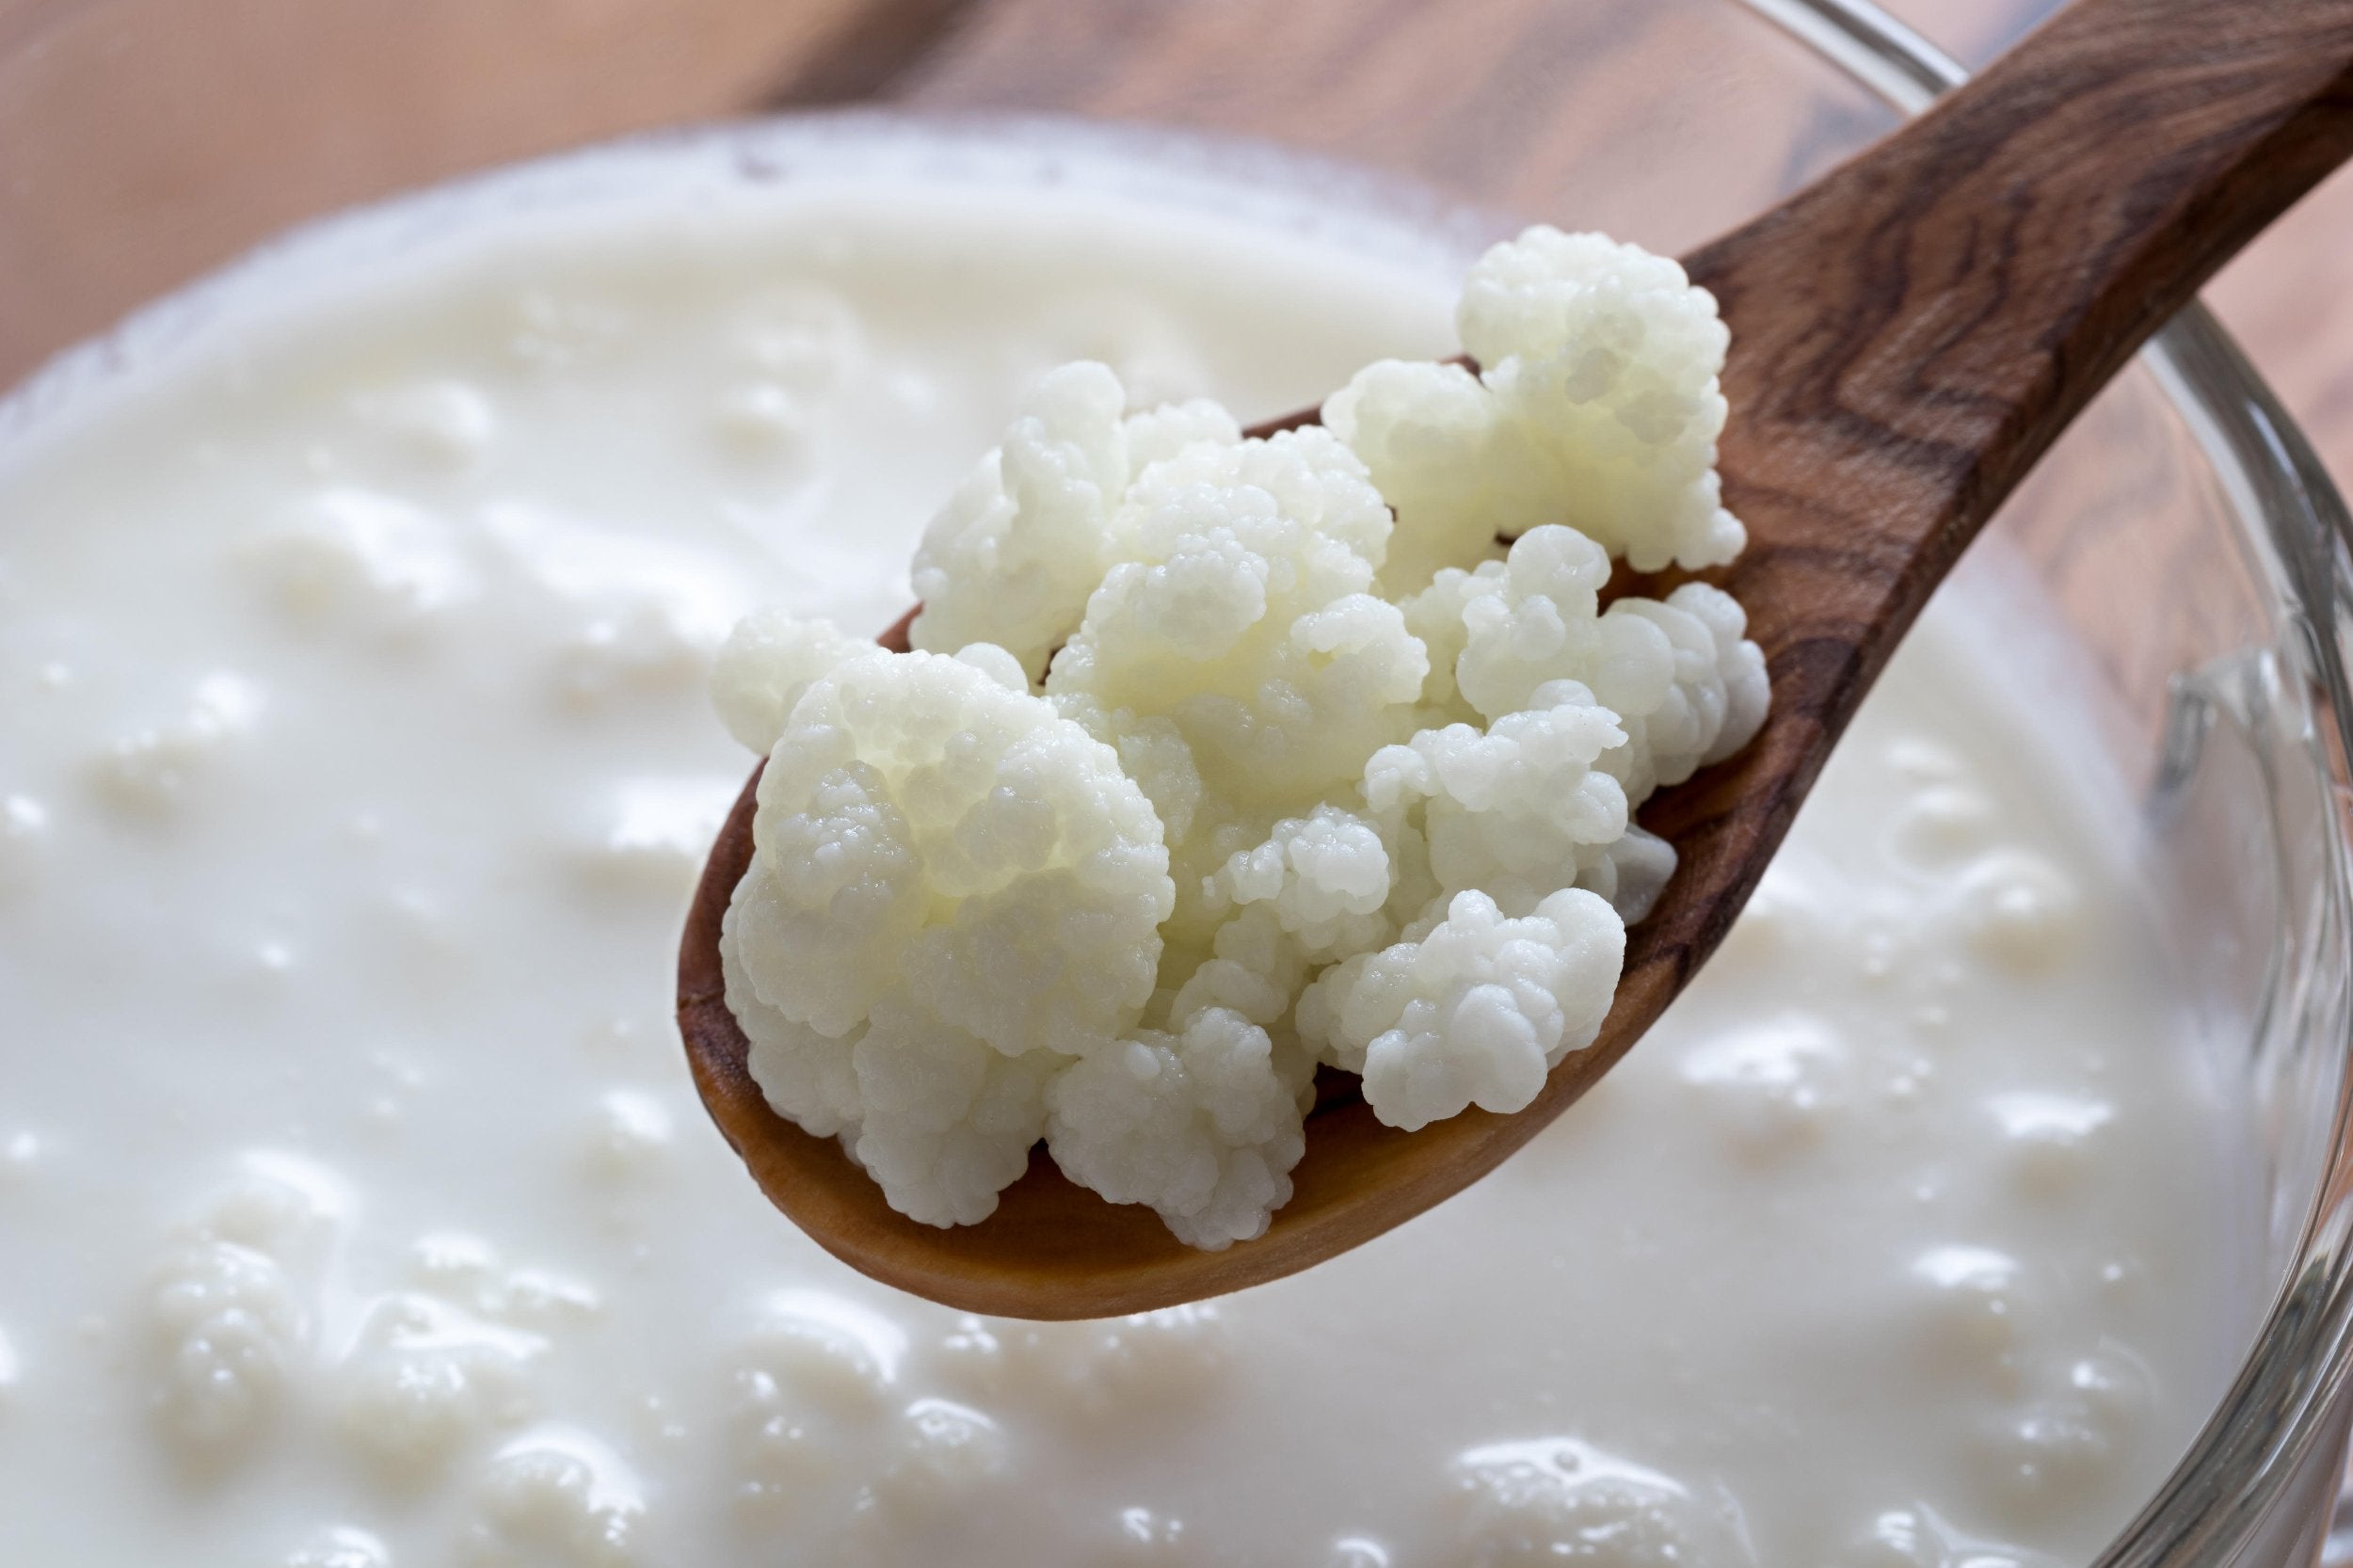 The Kefir Miracle: A True Story of How a Simple Fermented Drink Transformed a Man's Life